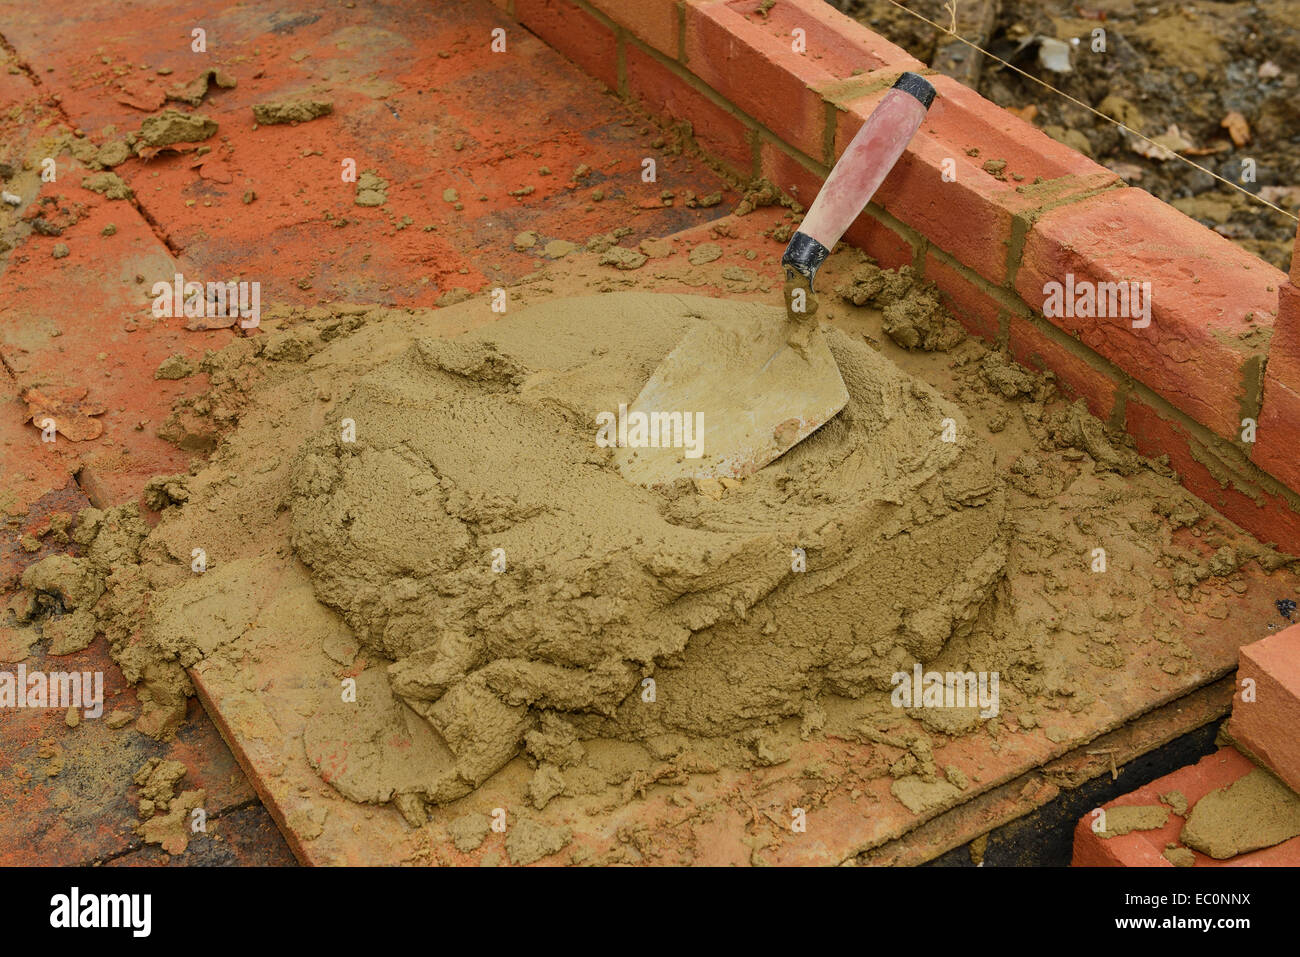 Bricklaying trowel and a board of mortar on a UK building site Stock Photo